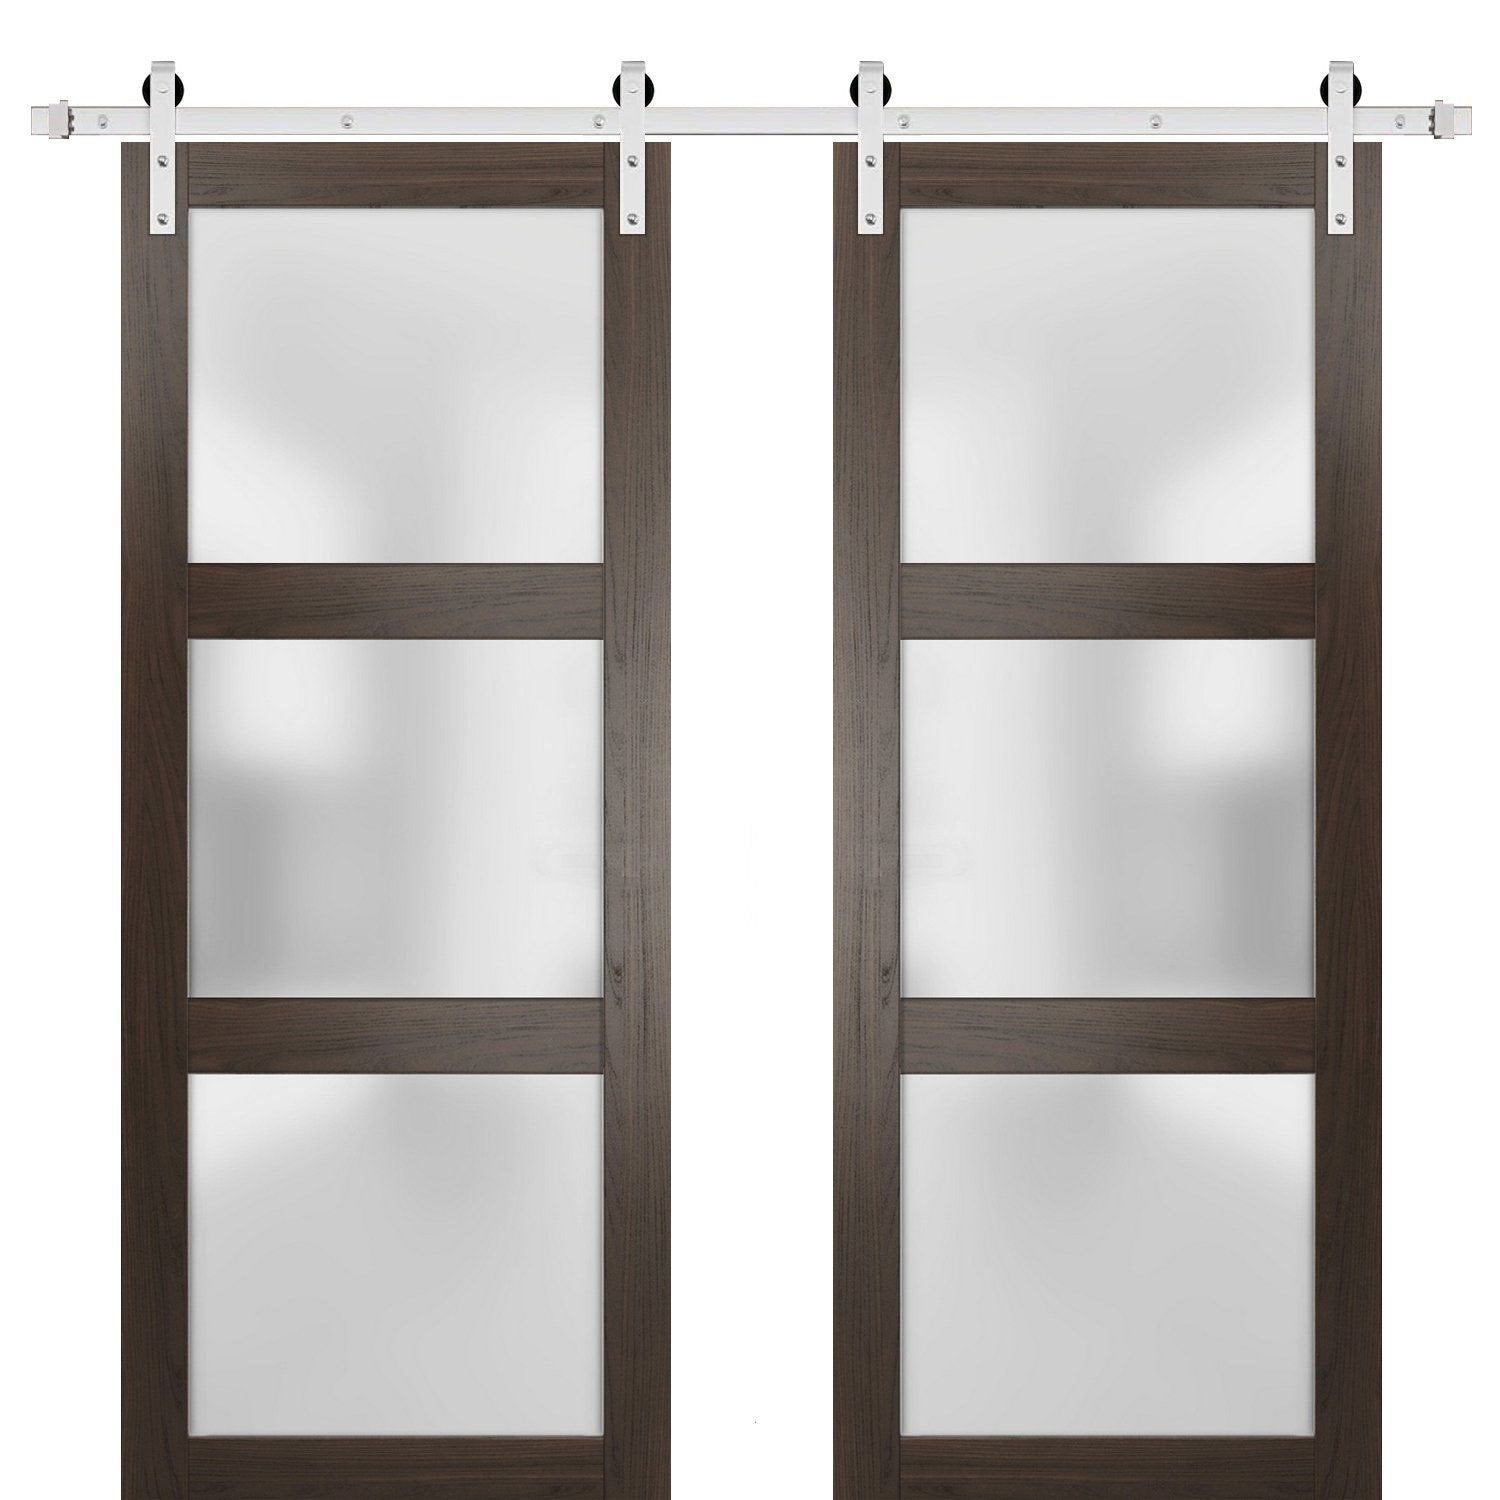 Lucia 2552 Chocolate Ash Double Barn Door with Frosted Glass | Stainless Steel Rail